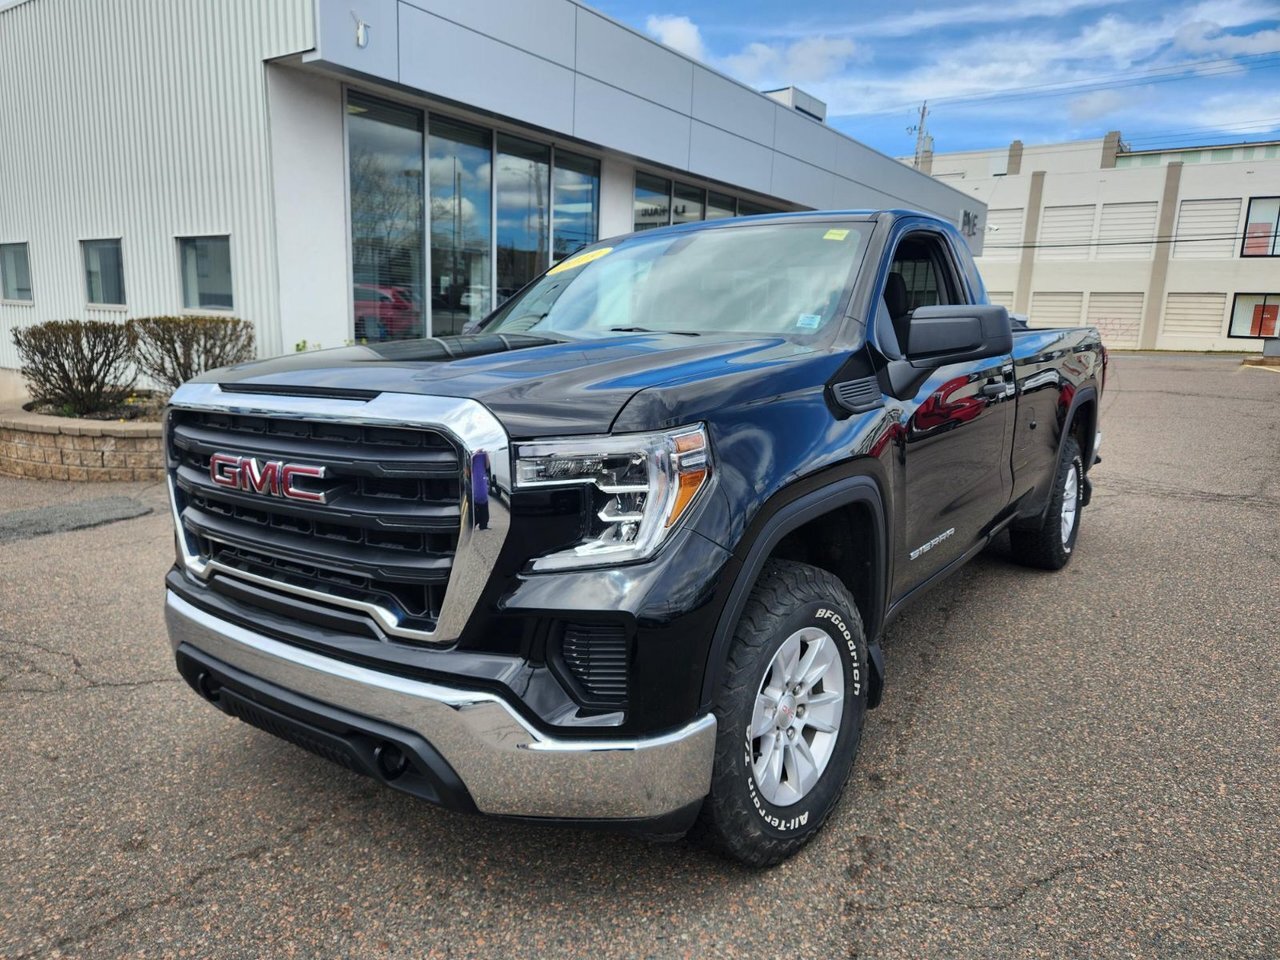 2019 GMC Sierra 1500 Elevate Every Drive: Conquer the Road with the 201